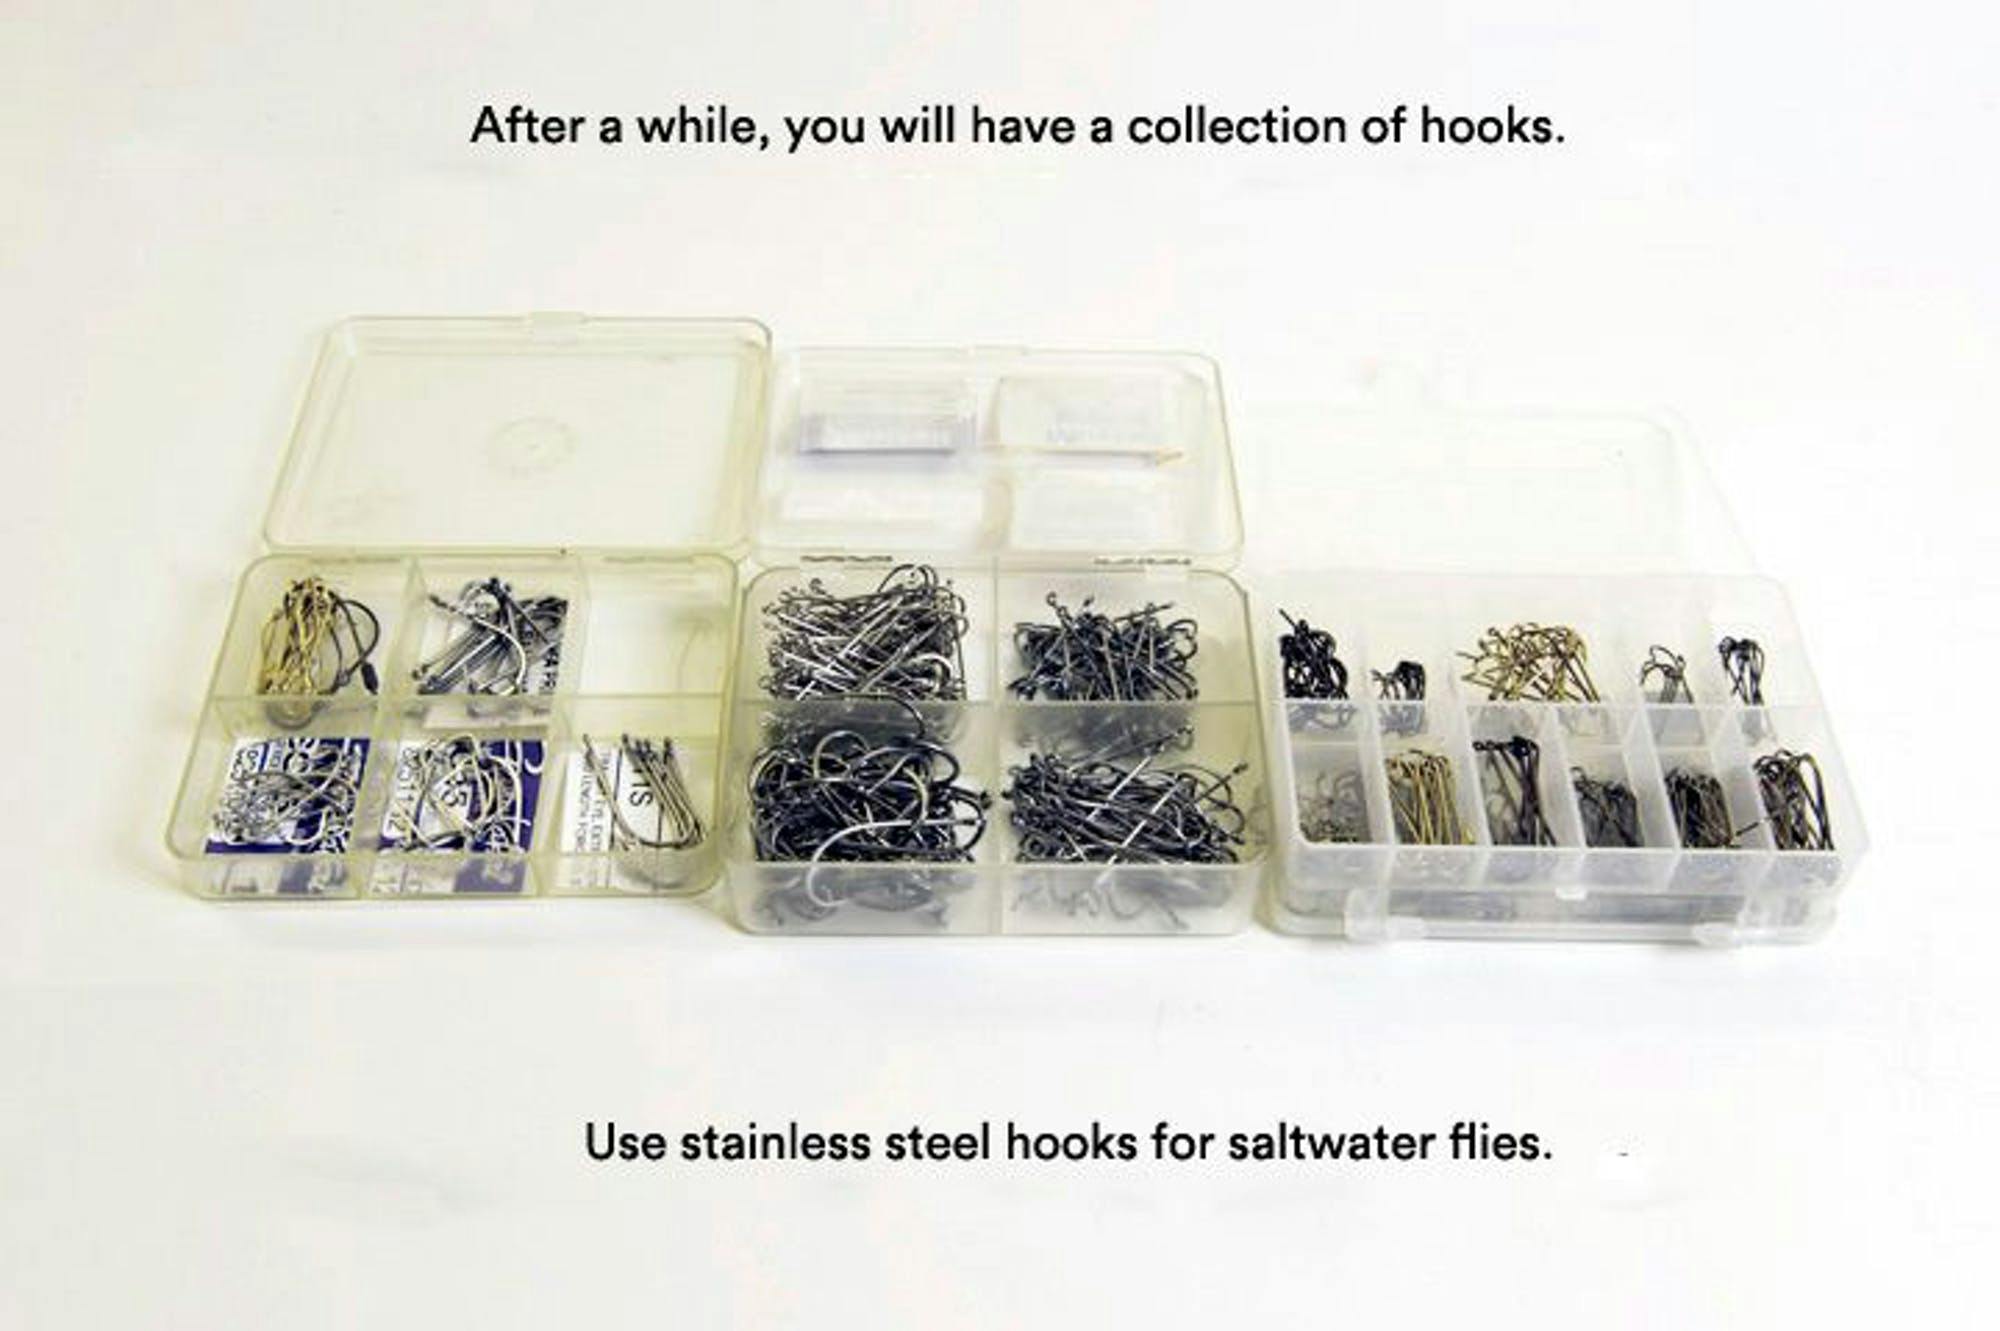 The author displays three clear boxes with compartments full of hooks. The text reads, "After a while, you will have a collection of hooks. Use stainless steel hooks for saltwater flies."